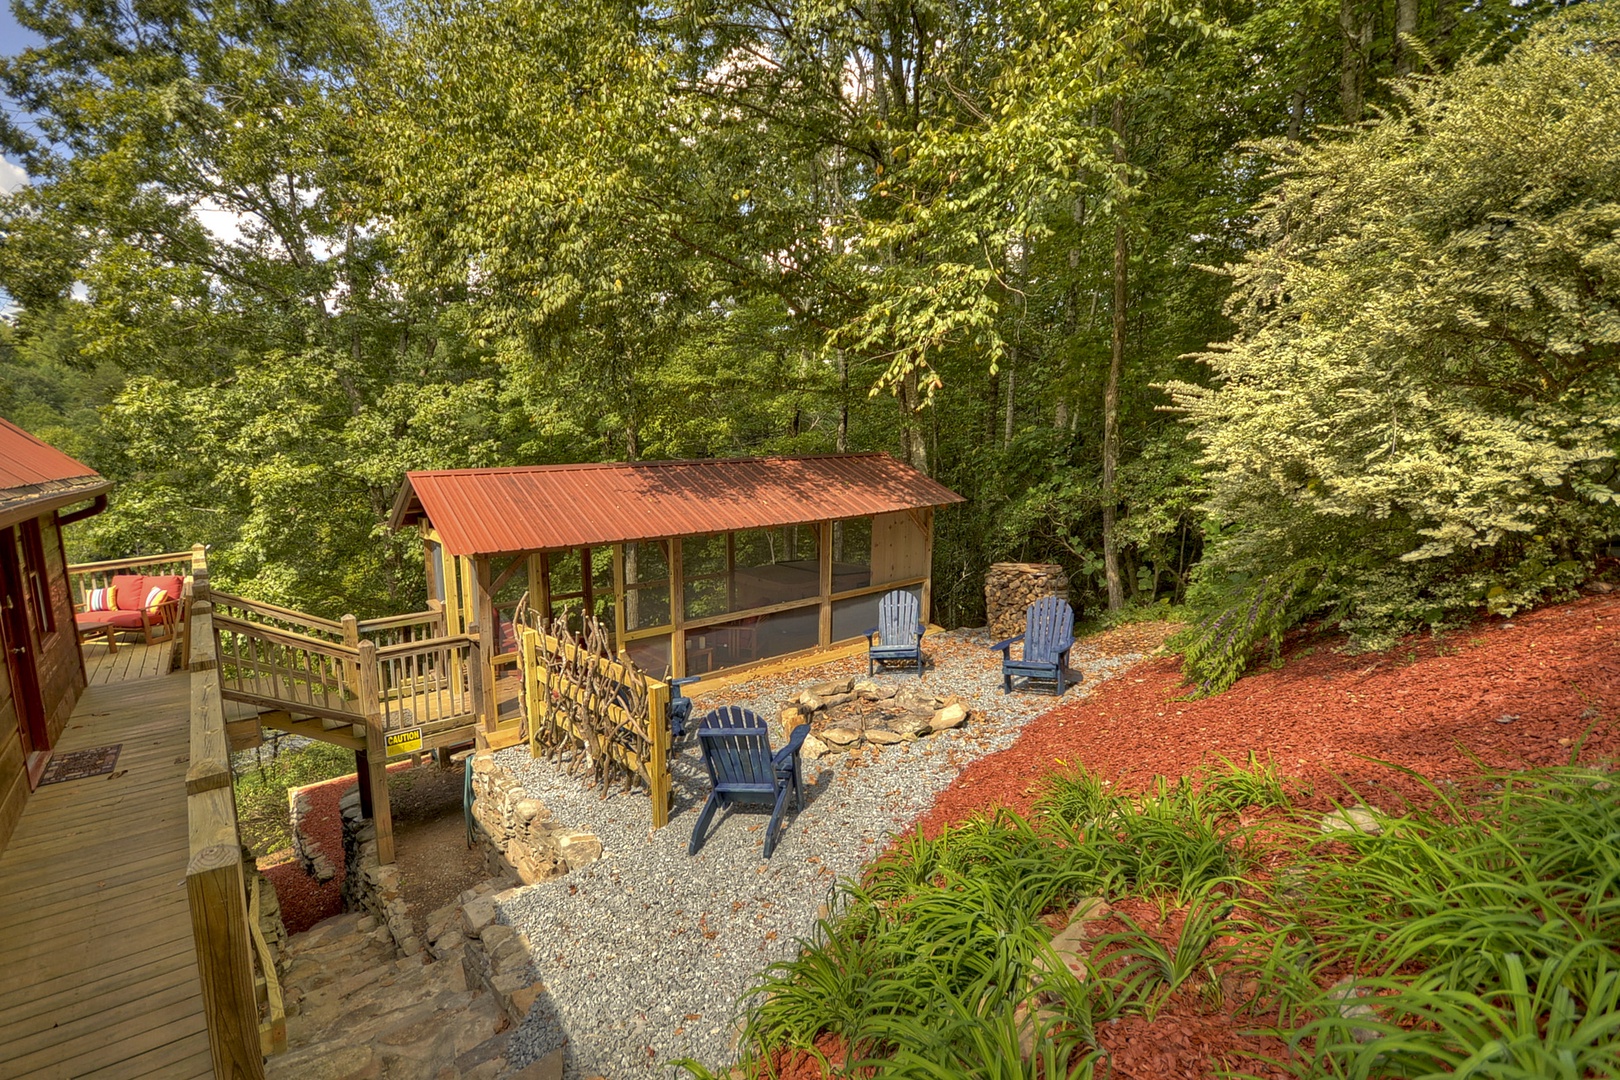 Toccoa Mist- Landscaping and outdoor firepit with seating